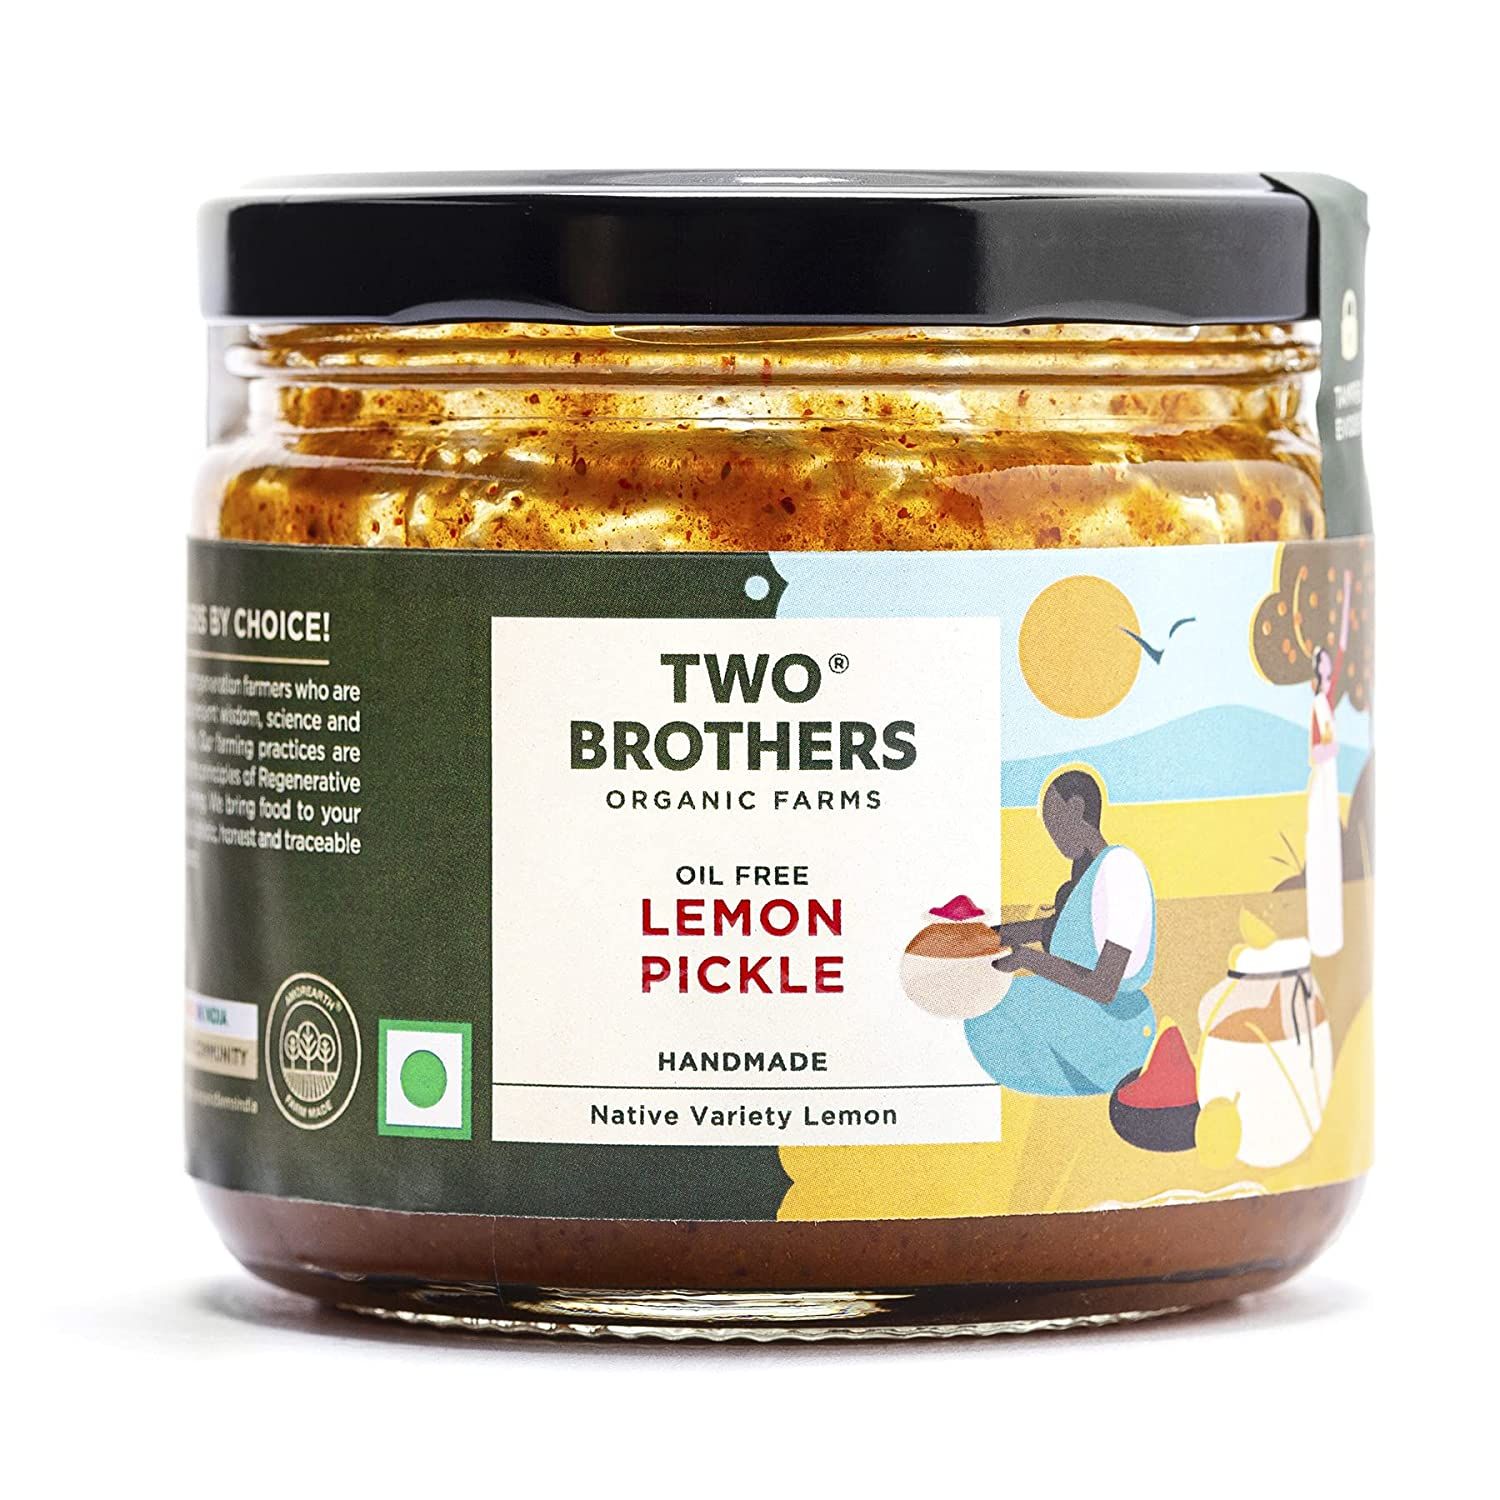 Two Brothers Organic Farms Lemon Pickle Image